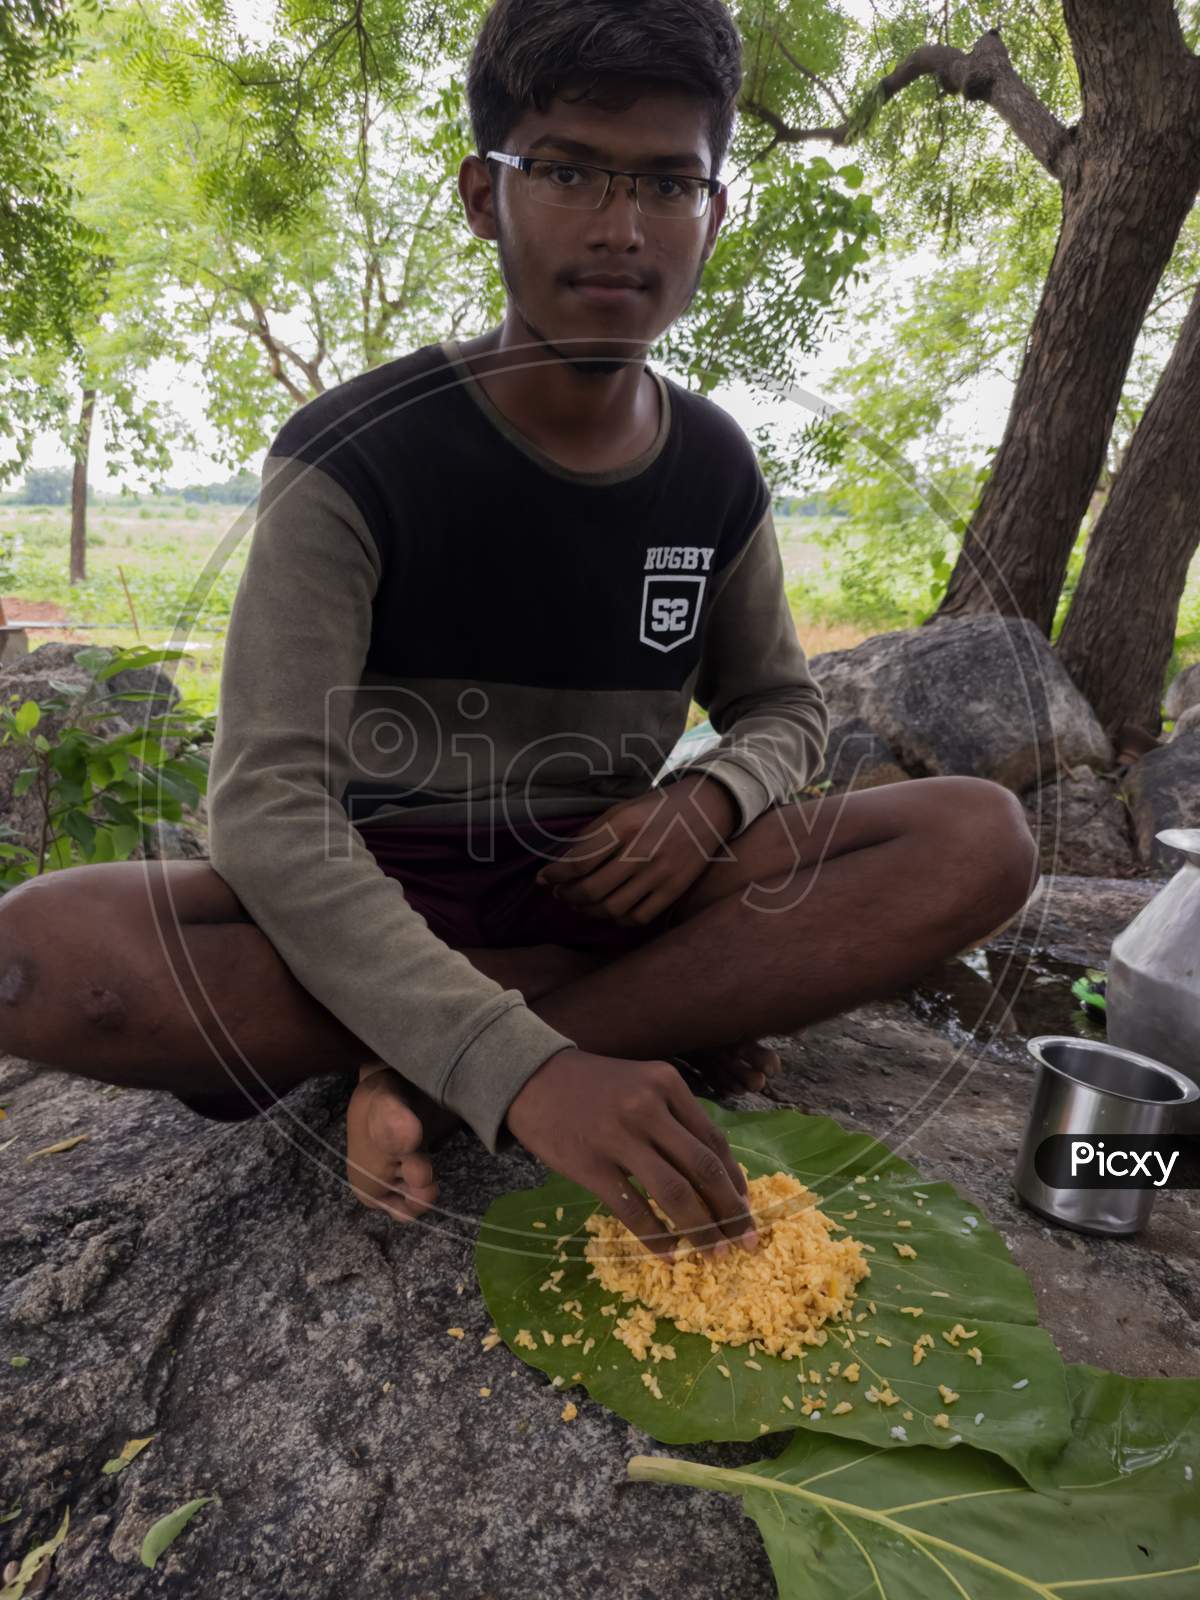 South Indian boy/teen eating food recipe with rice, dal and mango pickle.